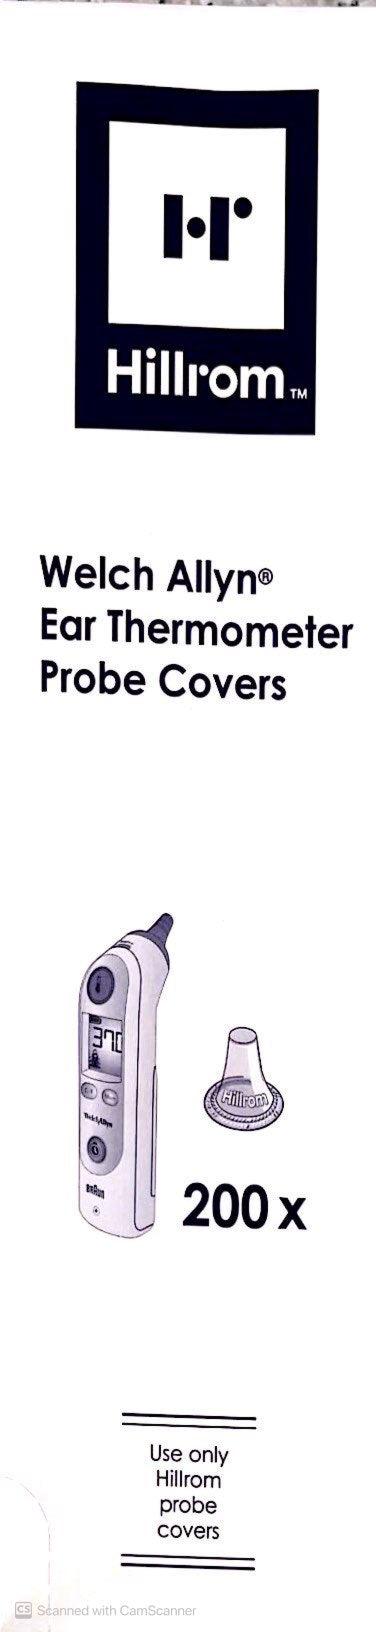 Welch Allyn Ear Thermometer Probe covers 200